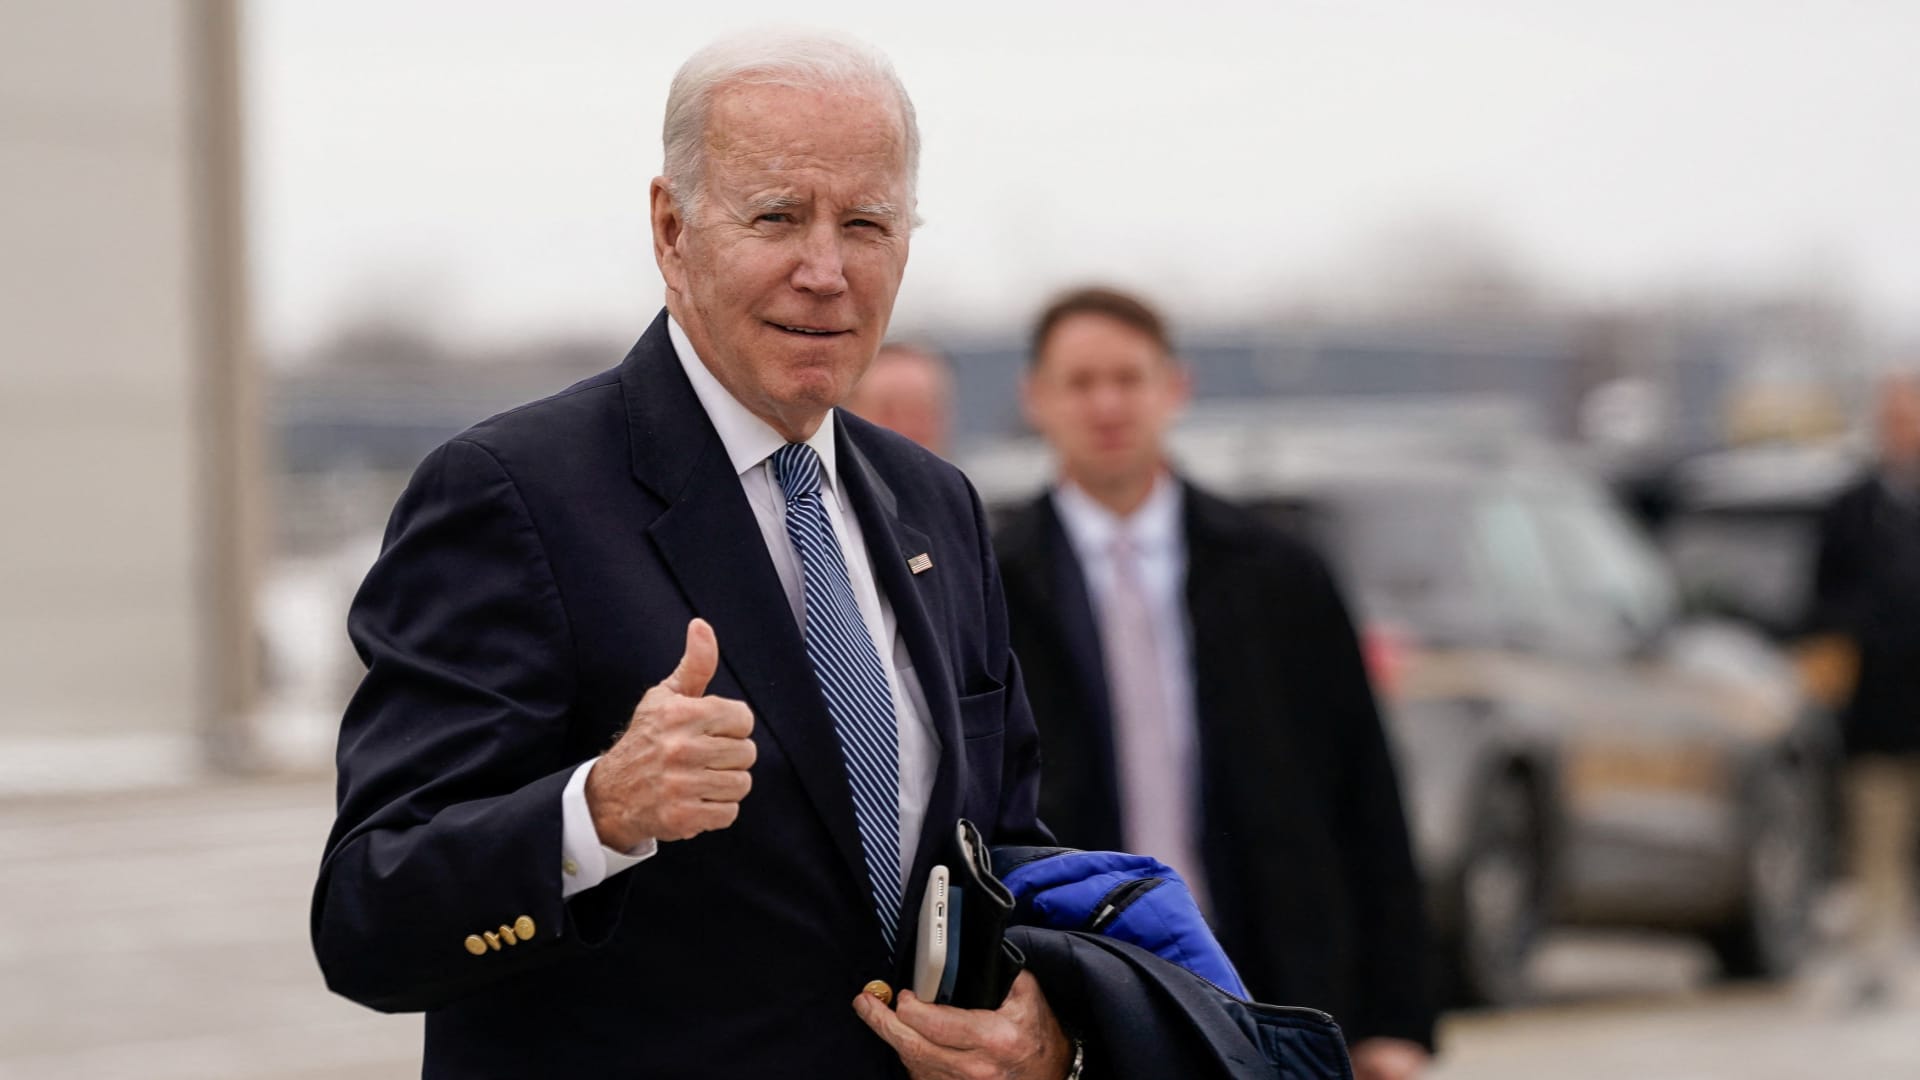 Biden to deliver State of the Union address amid high inflation and divided Congress that threaten to derail economy - CNBC - Tranquility 國際社群